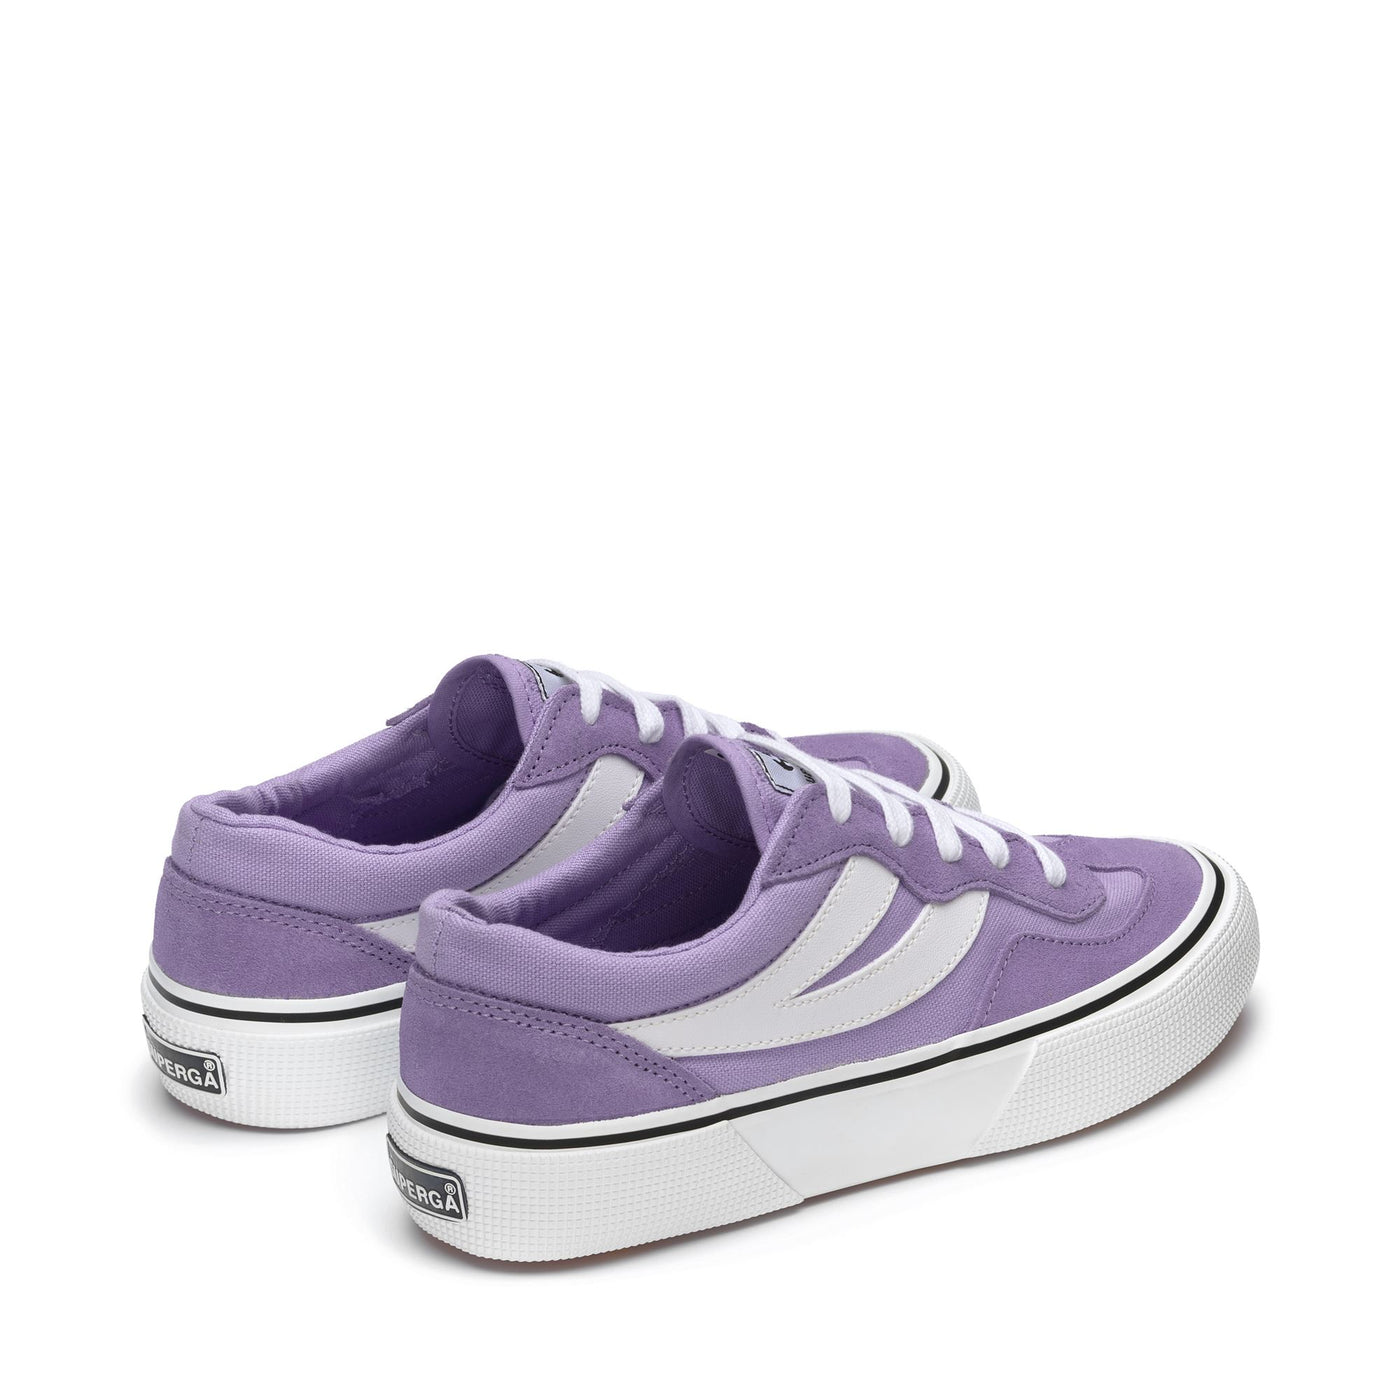 Sneakers Unisex 2941 REVOLLEY COLORBLOCK Low Cut VIOLET LILLA-WHITE Dressed Side (jpg Rgb)		